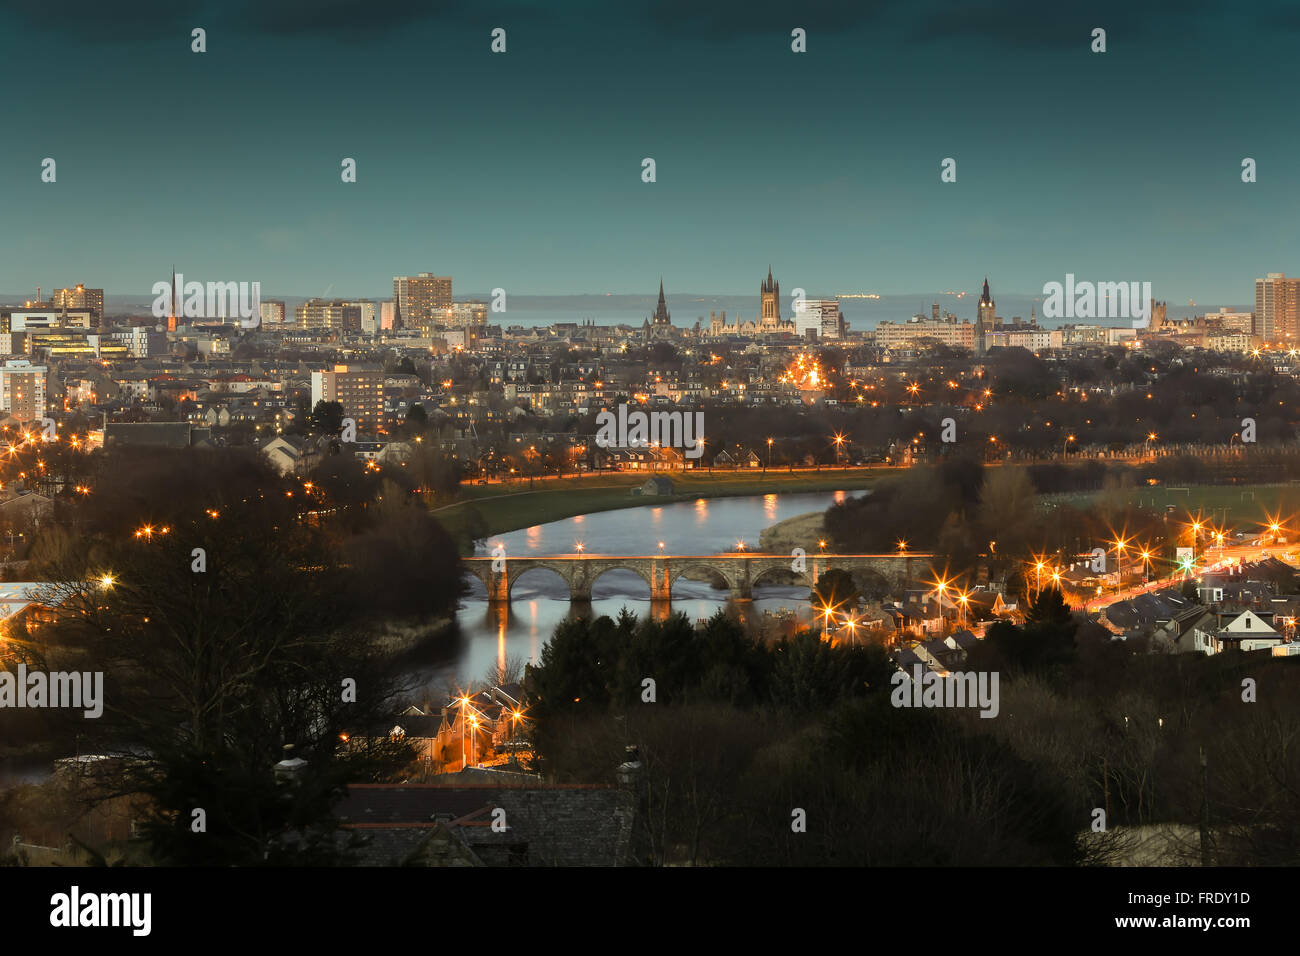 Skyline of the city of Aberdeen in Scotland, UK, at night with the River Dee in the foreground and the North Sea in background Stock Photo